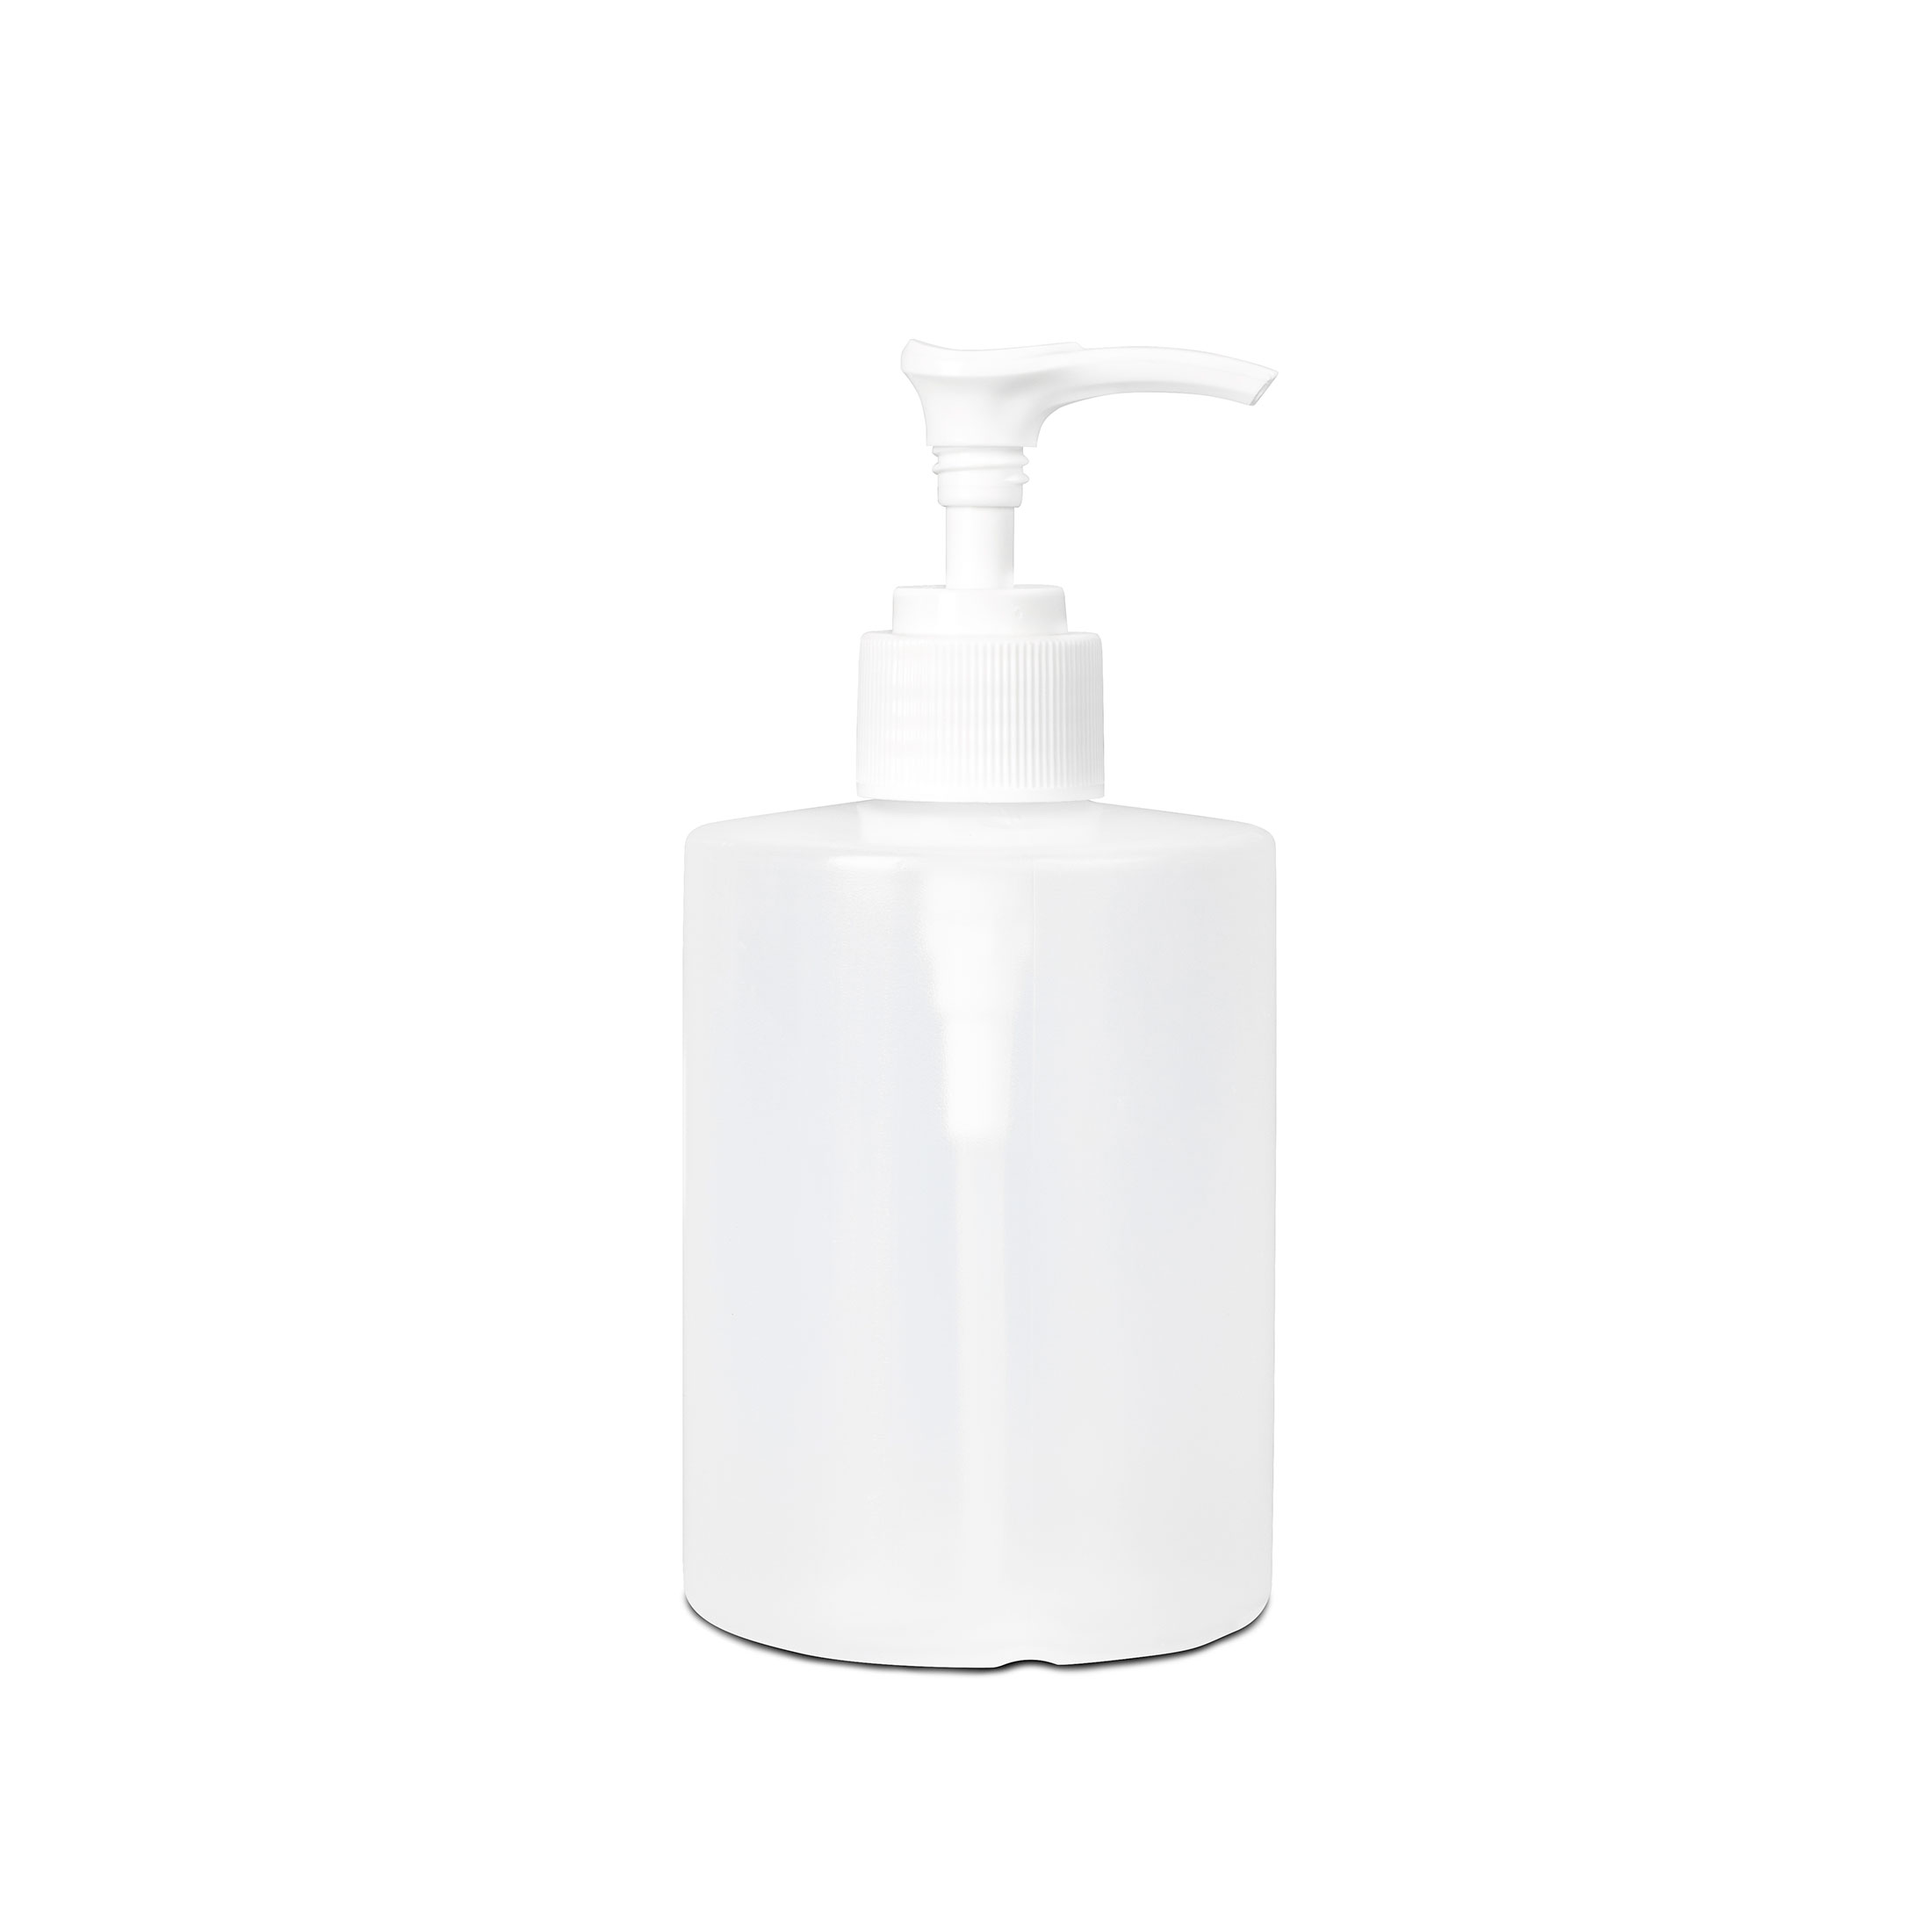 Hand Sanitizer Dispensers Products, Supplies and Equipment